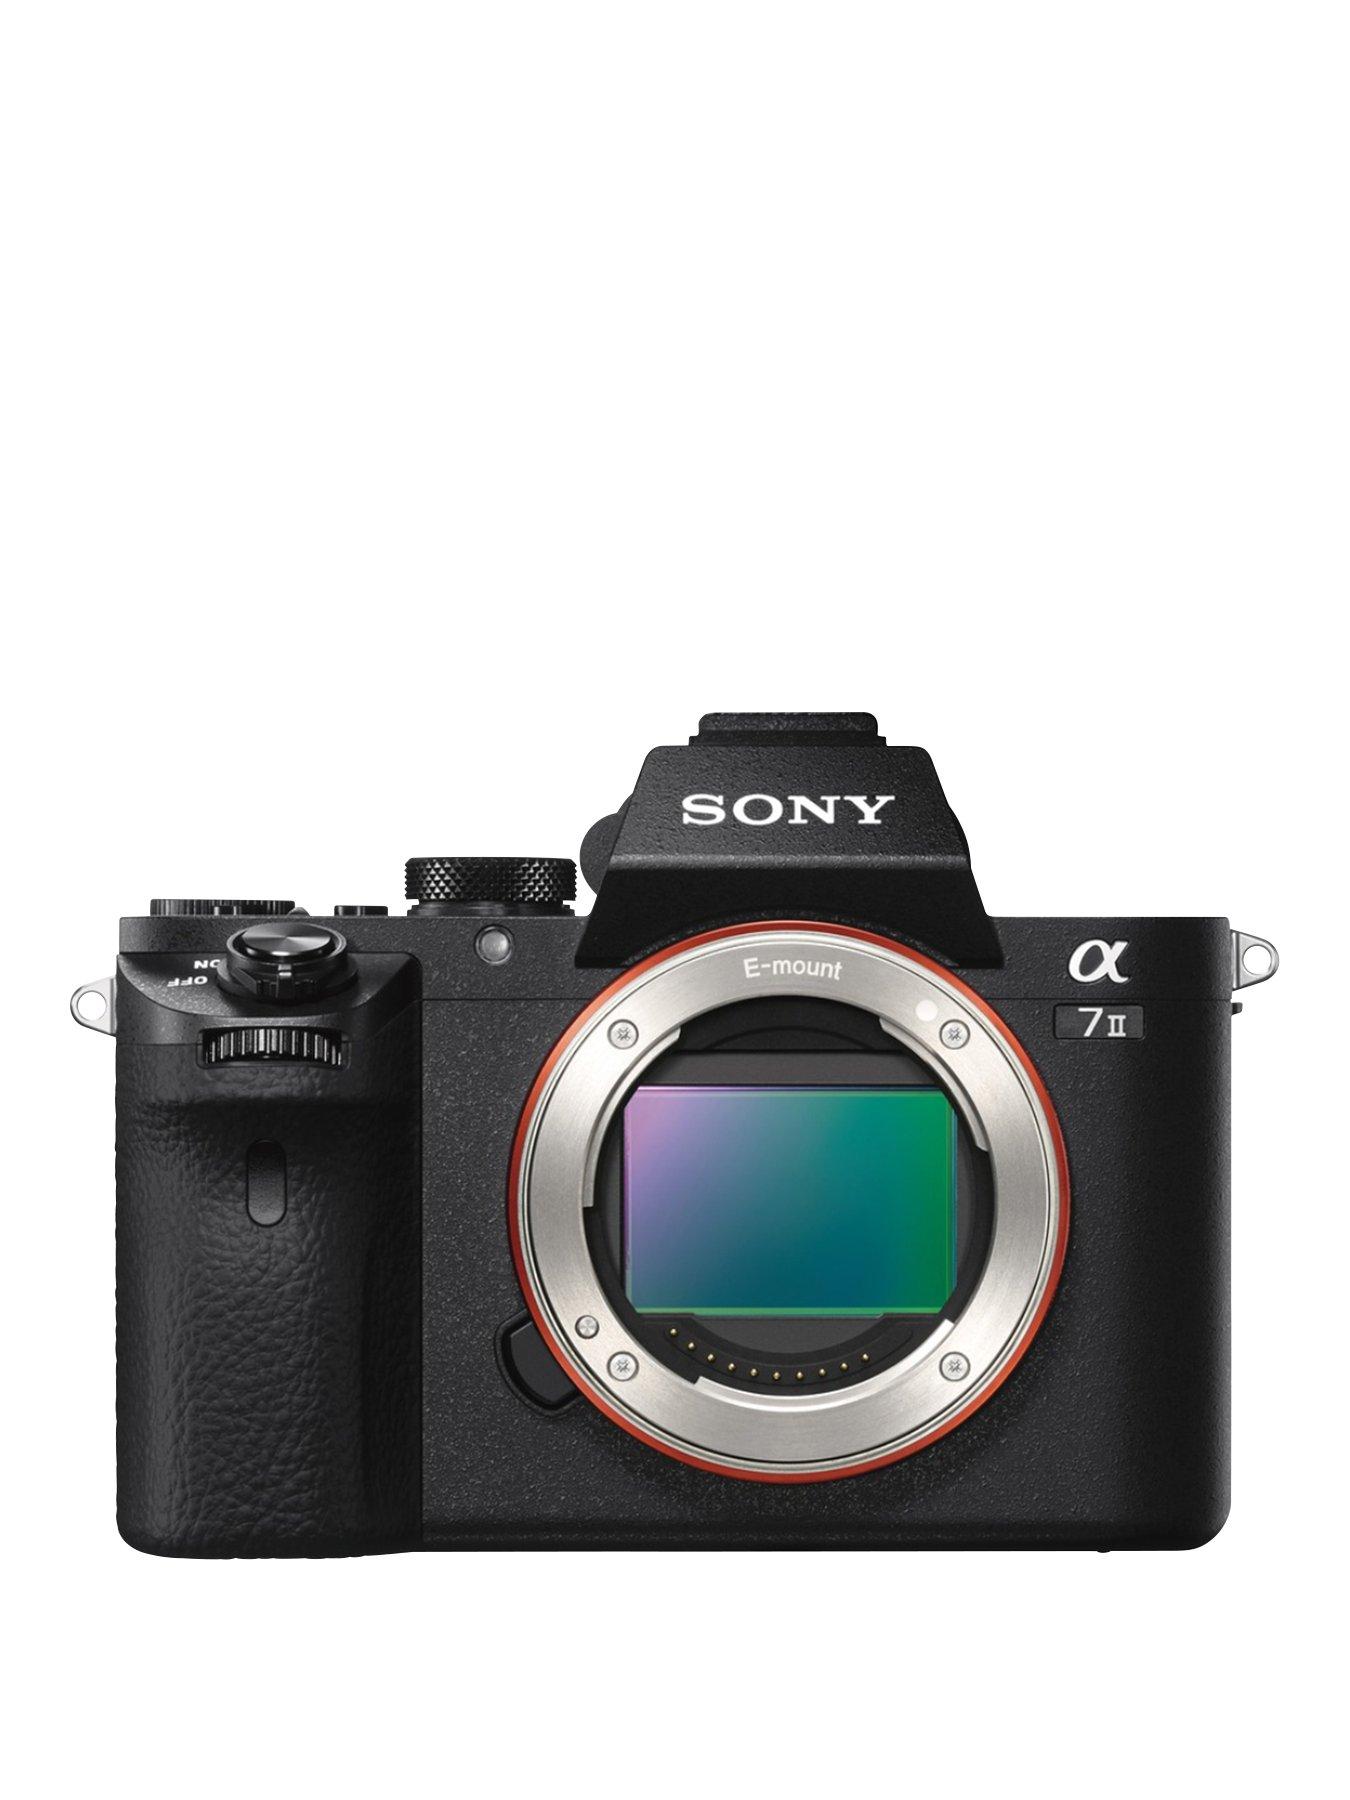 Sony A7 Mkii Compact System Camera With Full Frame Sensor (Body Only)